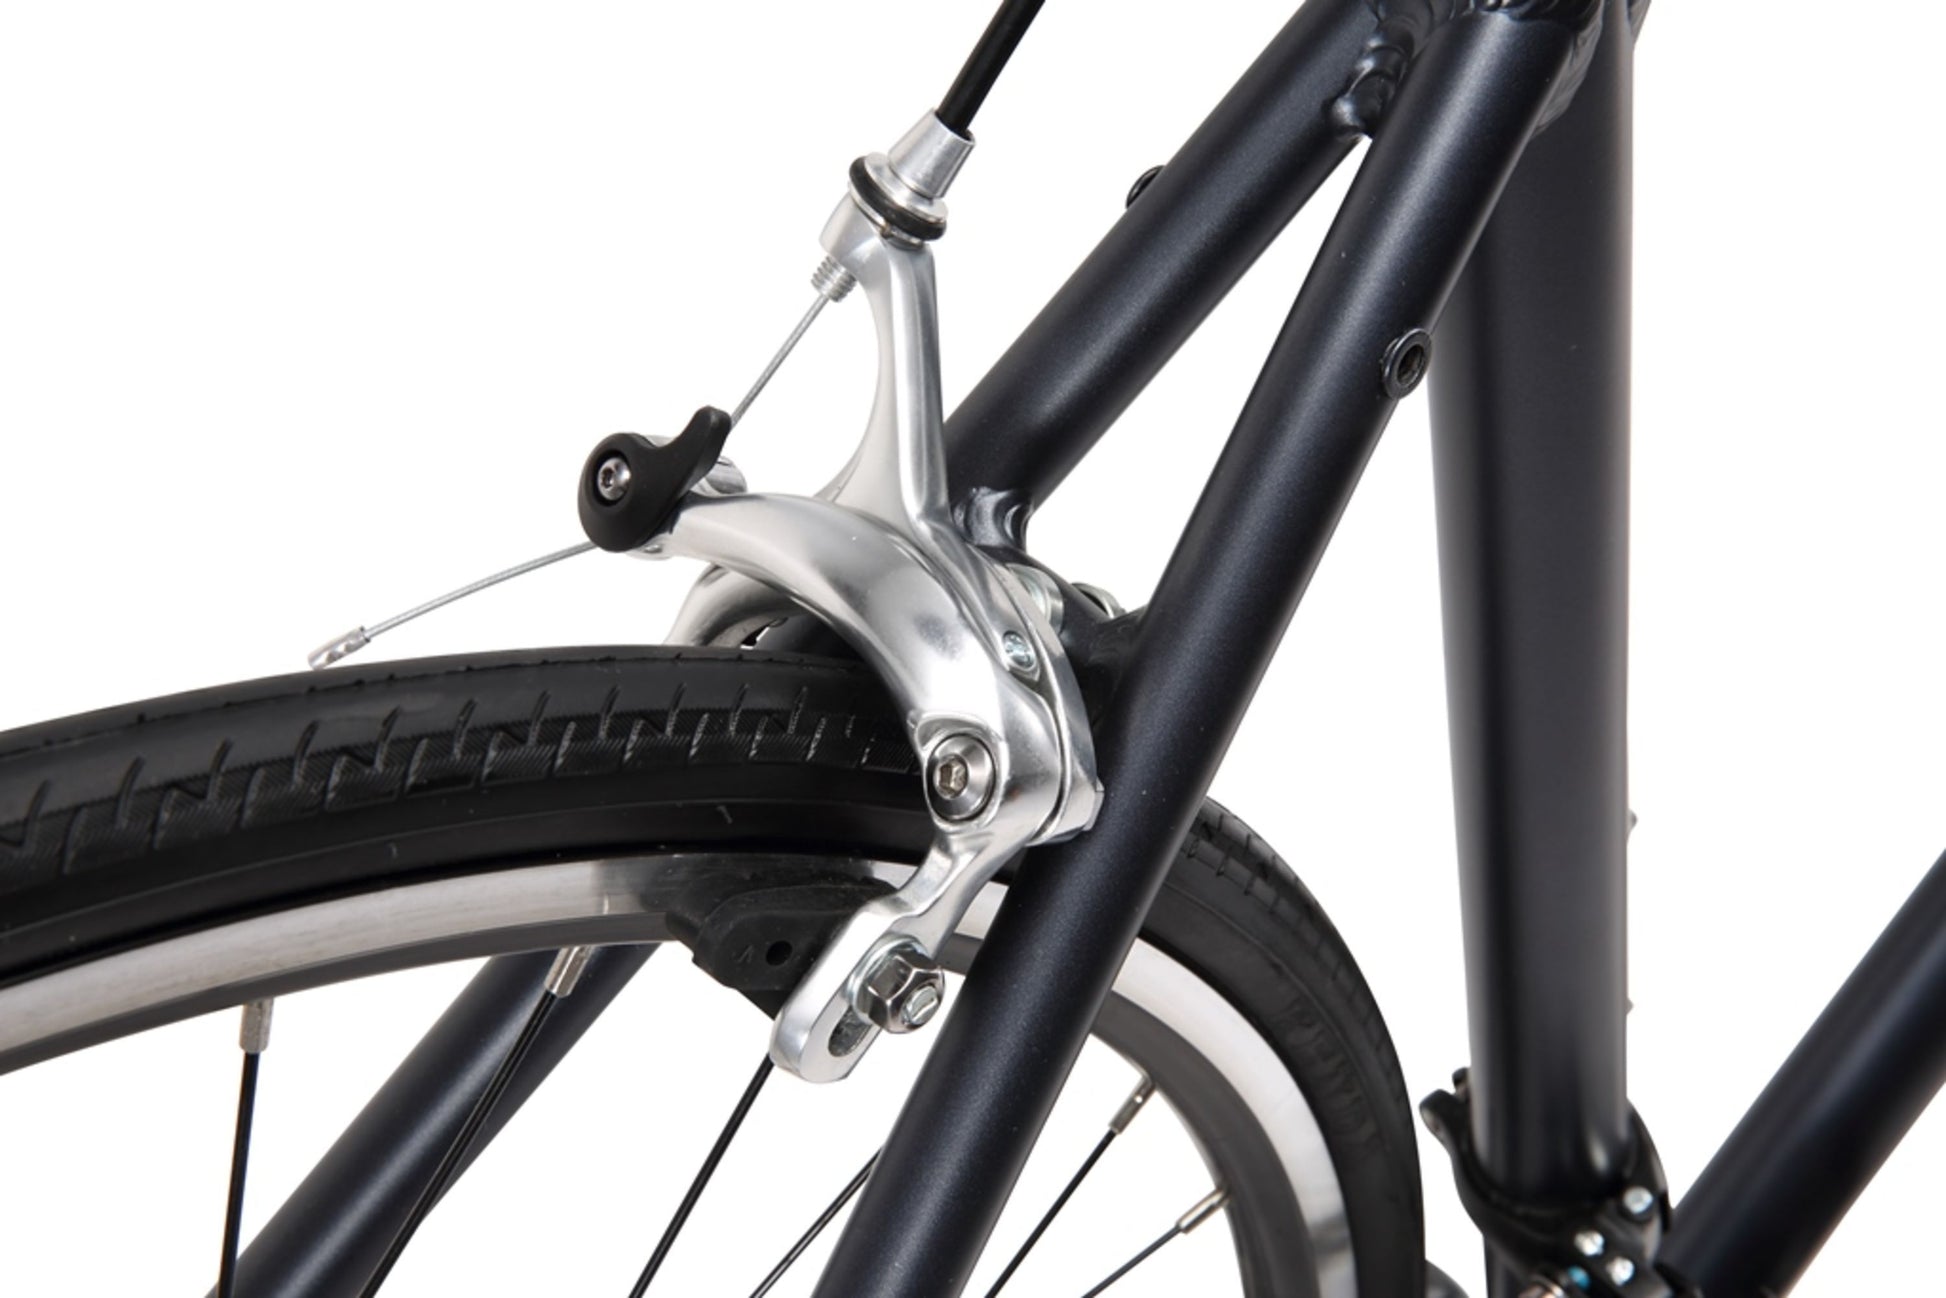 The Express Road in Gunmetal Grey featuring dual pivot caliper brakes from Reid Cycles Australia